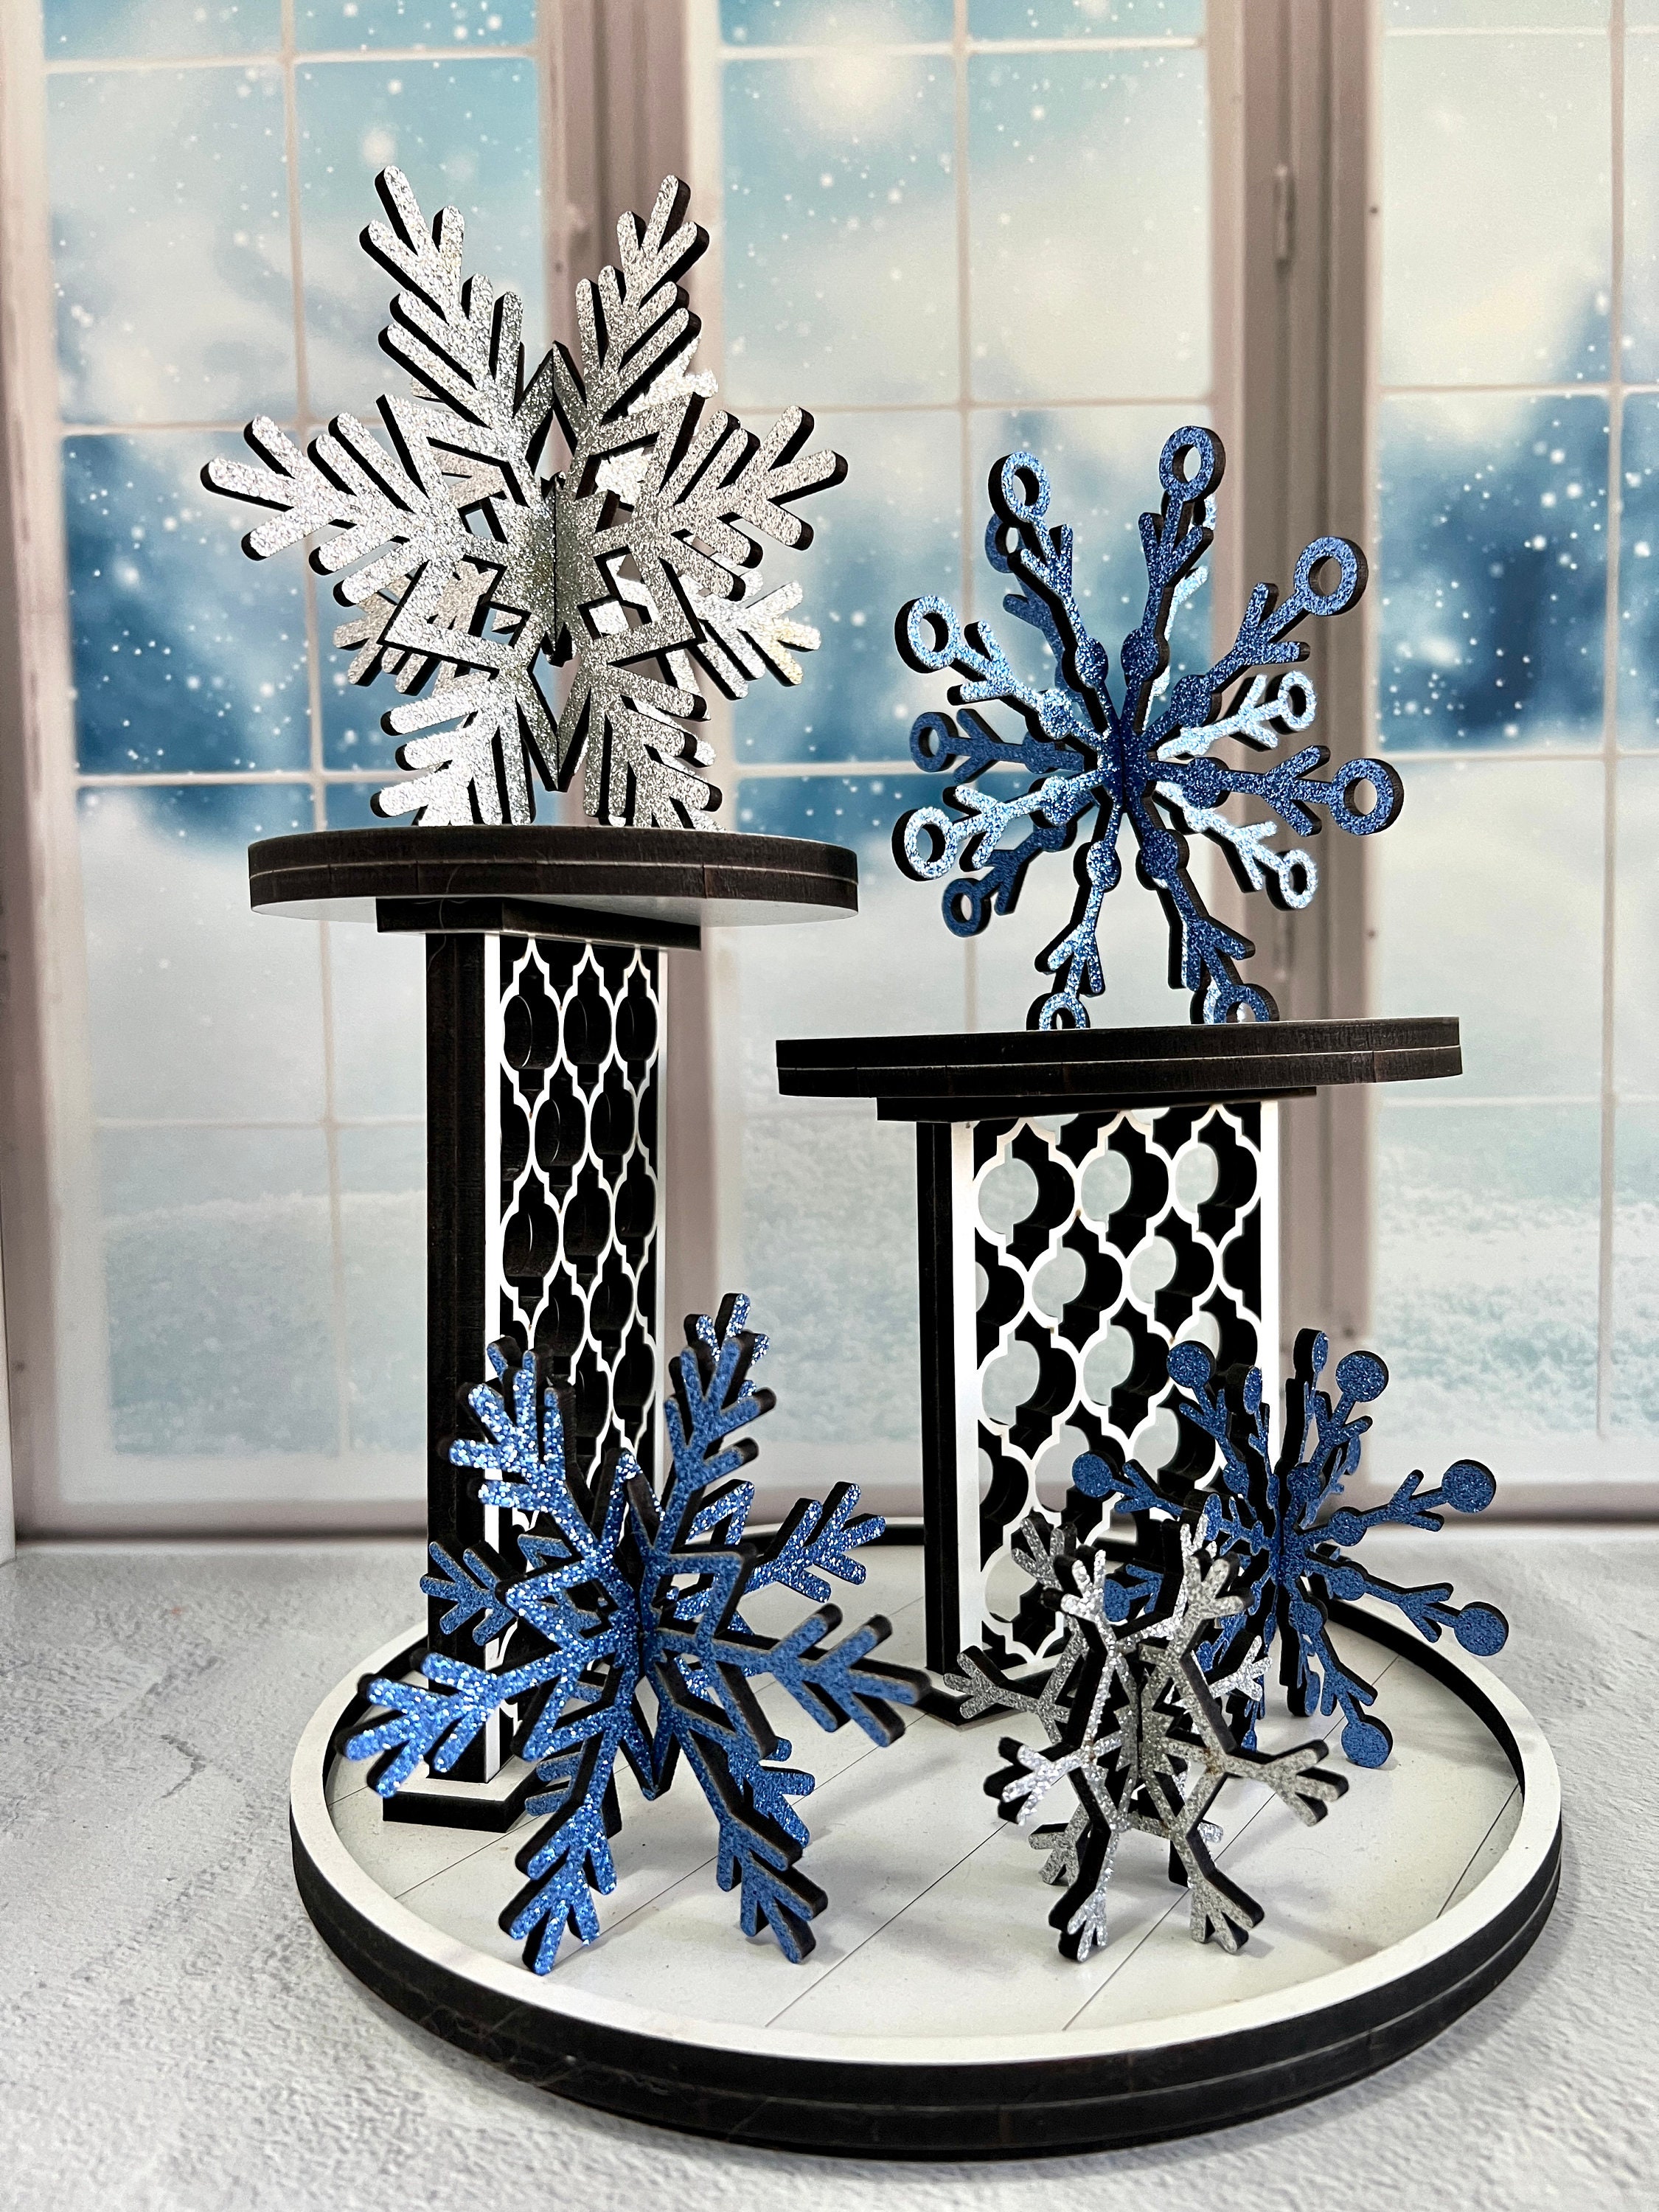 Handmade wooden snowflakes in flay lay on blue Christmas